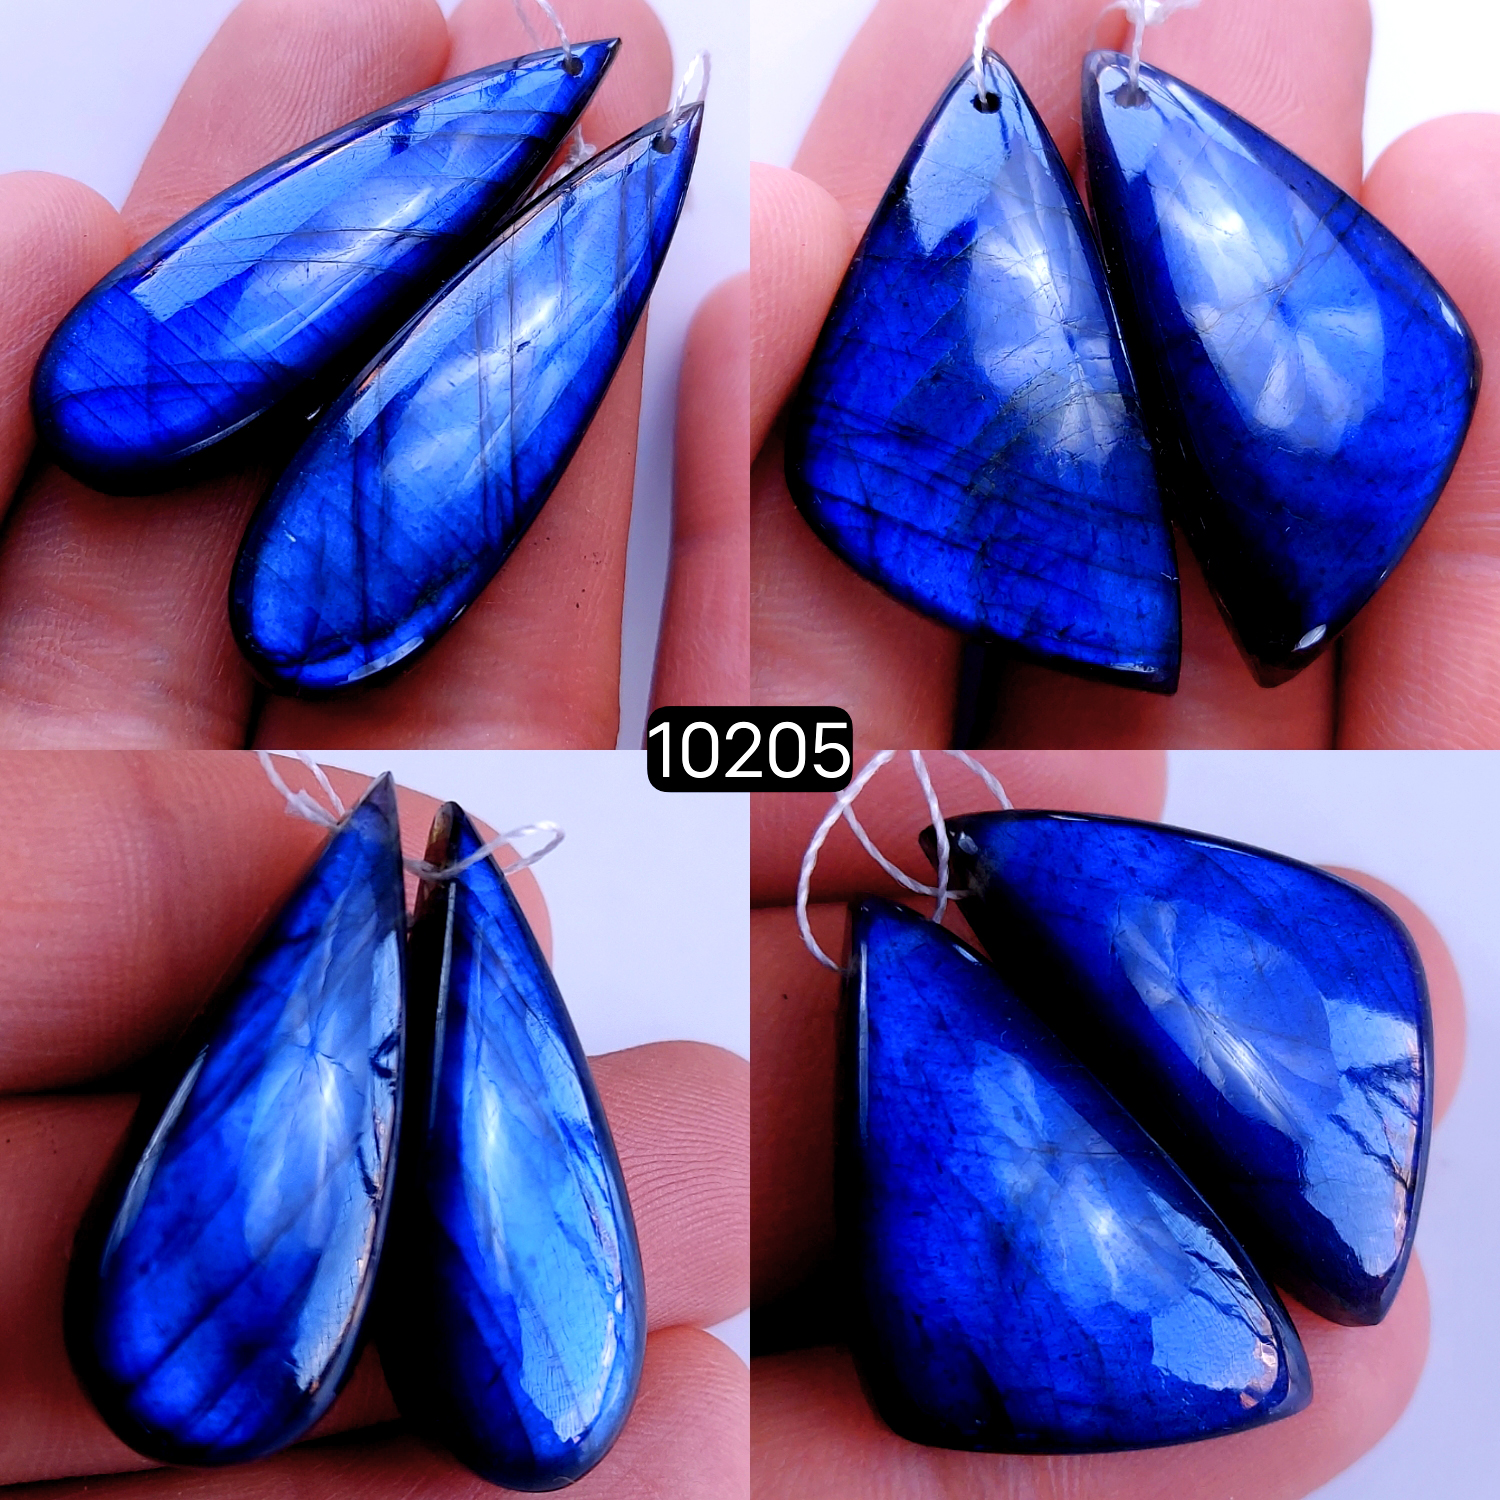 4Pair 183Cts Natural Labradorite Crystal Drill Dangle Drop Earring Pairs Silver Earrings Blue Labradorite Hoop Jewelry  42x12 32x12mm #10205